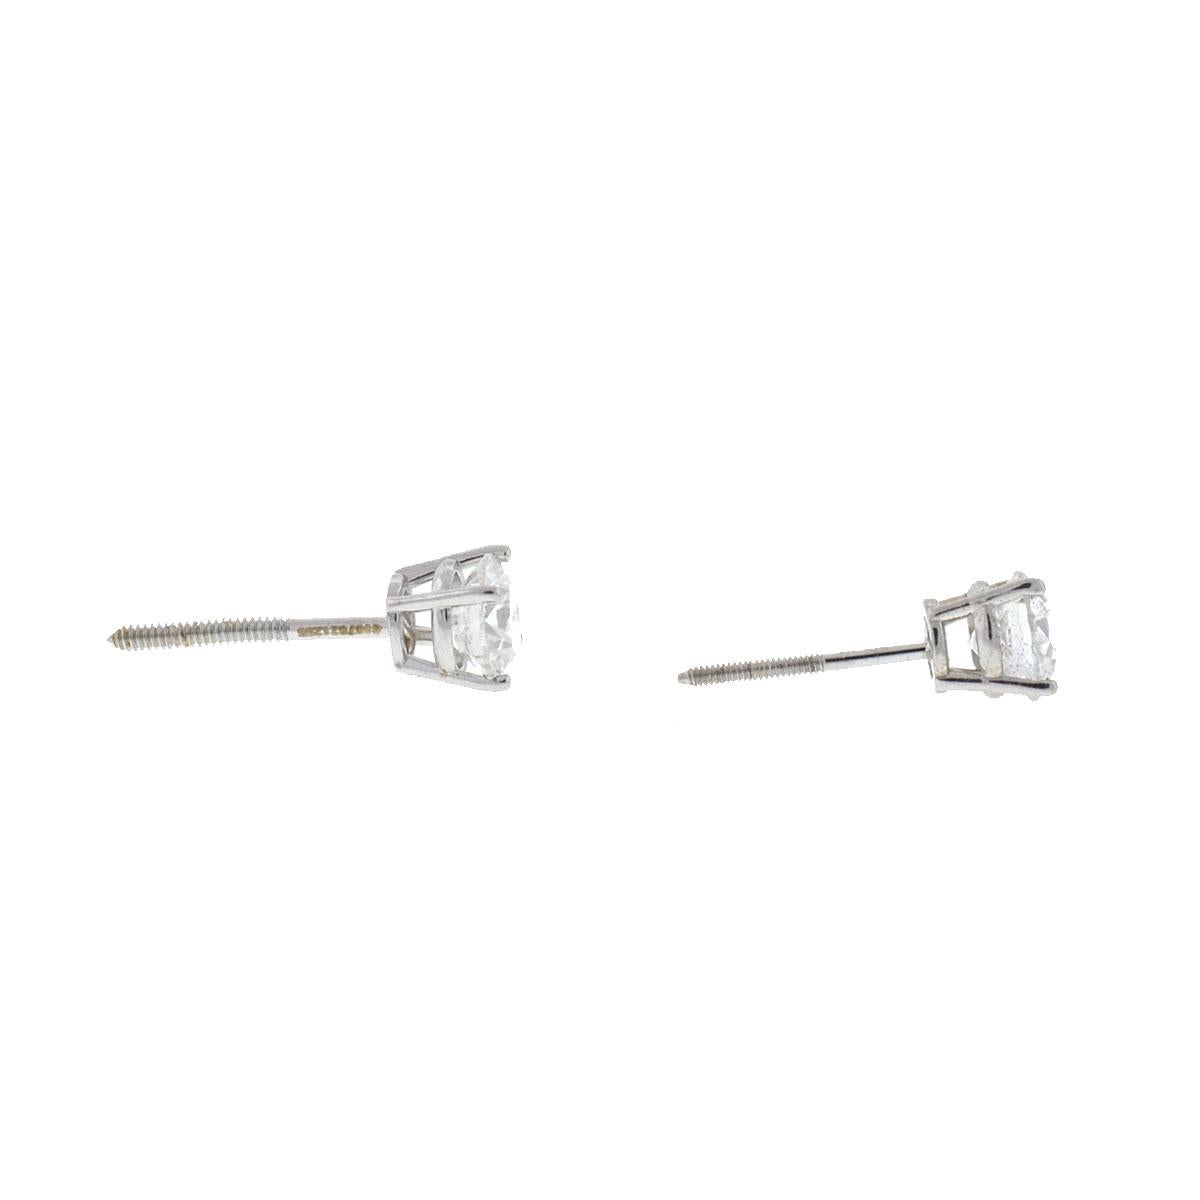 Company-N/A
Style-Diamond Stud Earrings
Metal-14k White Gold
Stones-Diamonds Approx. .99 Cts TW
Weight-.61 G 
Includes-Stud Only
SKU9081-1NTE